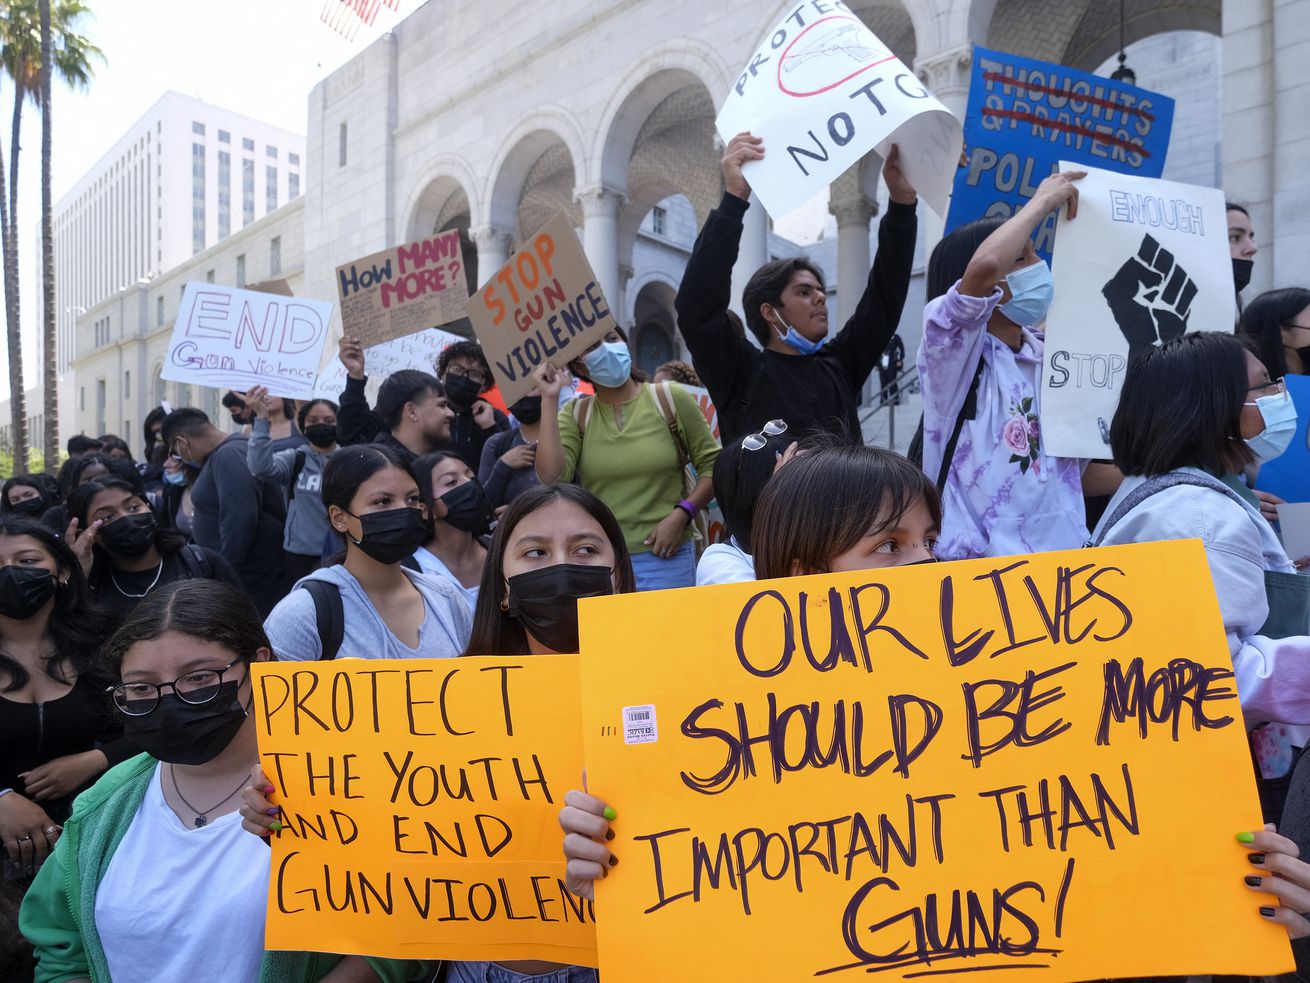 A crowd of students on the steps outside a government building hold signs that read “Our lives should be more important than guns!” and “Protect the youth and end gun violence.”